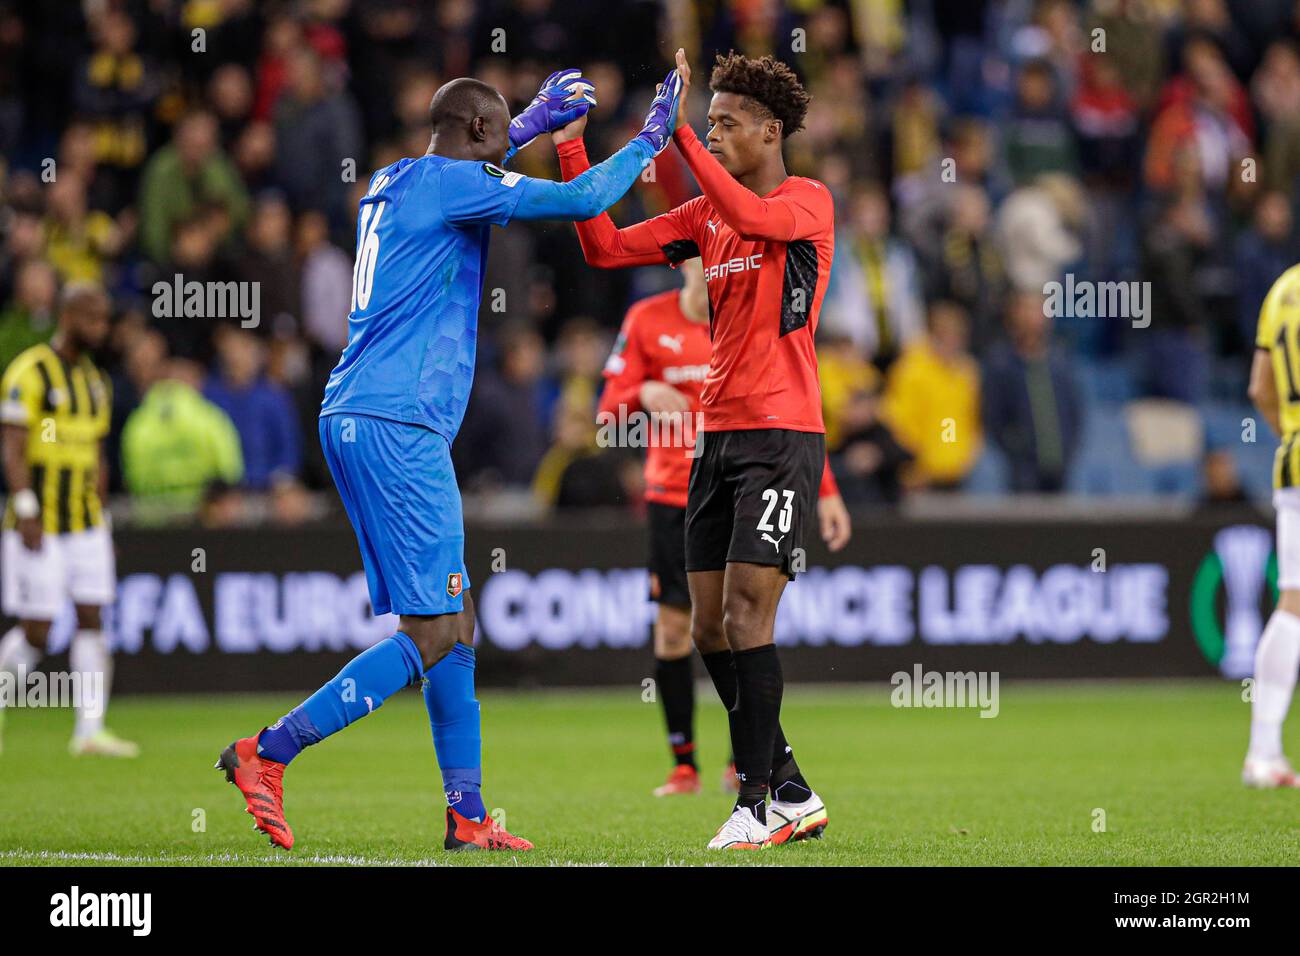 ARNHEM, NETHERLANDS - SEPTEMBER 30: goalkeeper Alfred Gomis of Stade Rennais, Warmed Omari of Stade Rennais during the UEFA Conference League match between Vitesse and Stade Rennais at Gelredome on September 30, 2021 in Arnhem, Netherlands (Photo by Peter Lous/Orange Pictures) Stock Photo